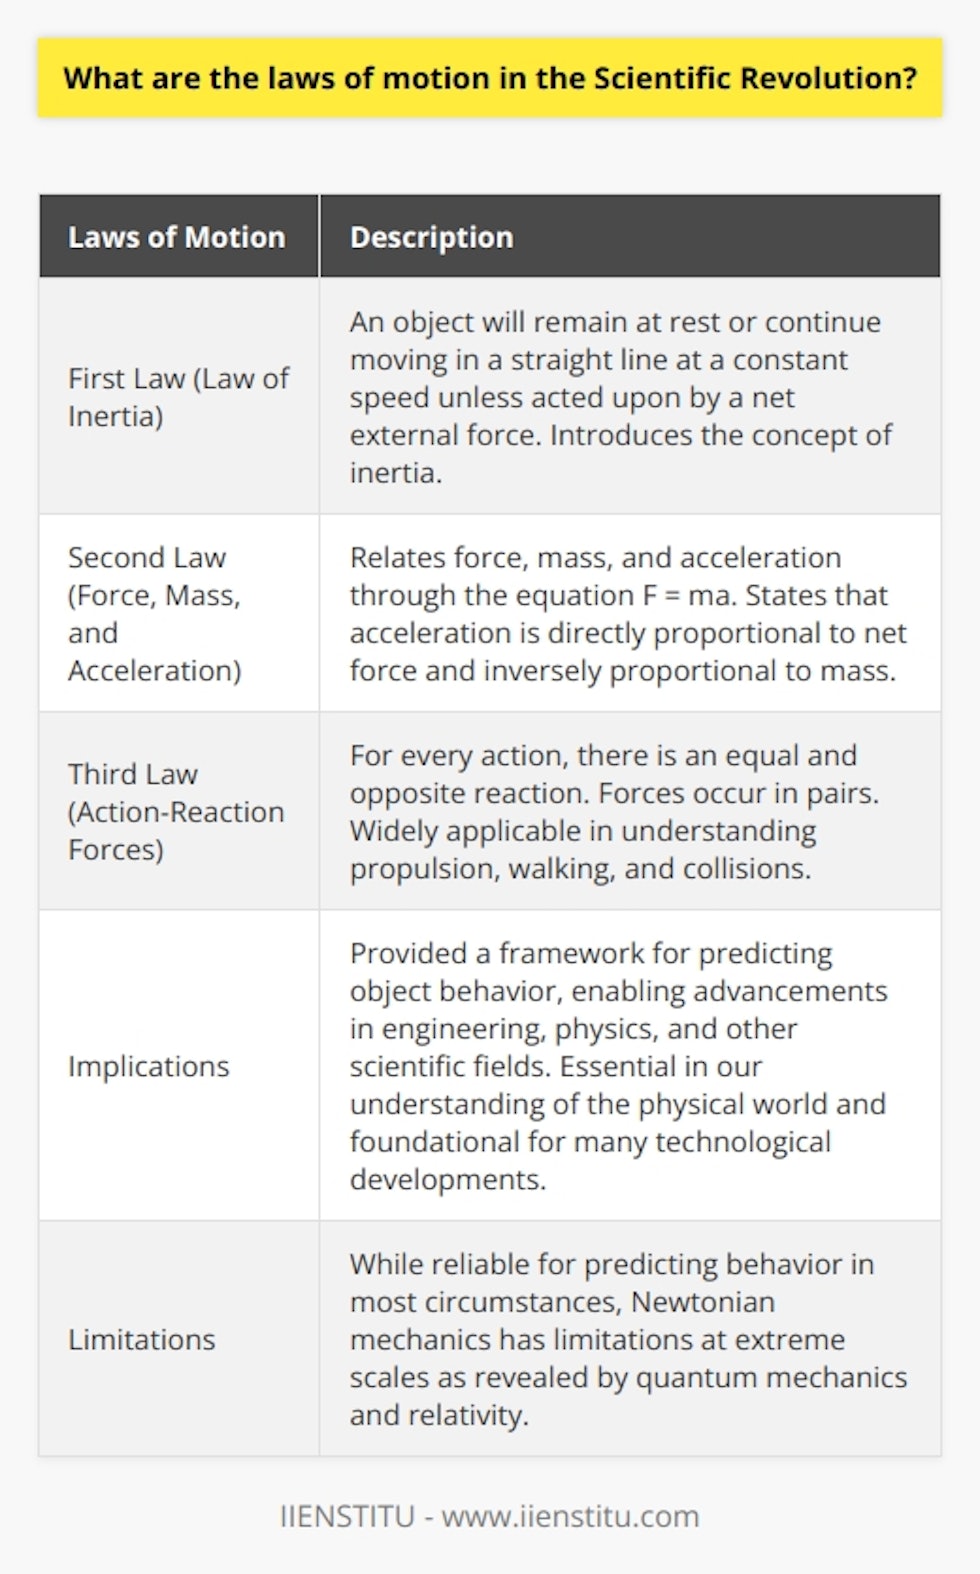 The laws of motion formulated during the Scientific Revolution by Sir Isaac Newton played a crucial role in the development of classical mechanics. These laws paved the way for a comprehensive understanding of the motion of objects and their interactions with forces. The first law, known as the law of inertia, challenged the previous Aristotelian view that motion required a continuous force to be maintained. According to this law, an object will remain at rest or continue moving in a straight line at a constant speed unless acted upon by a net external force. This concept introduced the idea of inertia, which is the inherent tendency of an object to resist changes in its state of motion.The second law of motion establishes a fundamental relationship between force, mass, and acceleration. Newton quantified this relationship using the equation F = ma, where F represents the net external force acting on an object, m denotes the object's mass, and a is the resulting acceleration. This law states that the acceleration of an object is directly proportional to the net force applied to it and inversely proportional to its mass. In simpler terms, a greater force is required to accelerate a heavier object compared to a lighter one.The third law of motion states that for every action, there is an equal and opposite reaction. This means that forces always occur in pairs. When an object exerts a force on another object, the second object simultaneously exerts an equal and opposite force on the first object. This law has wide-ranging applications, such as in understanding rocket propulsion, walking, and collisions.These laws of motion have had profound implications in modern science and technology. They provide a reliable framework for predicting the behavior of objects in various circumstances, enabling advancements in engineering, physics, and other scientific fields. While Newtonian mechanics has its limitations when it comes to extreme scales as revealed by quantum mechanics and relativity, the laws of motion continue to be essential in our understanding of the physical world. They remain foundational knowledge for many innovations and technological developments today.